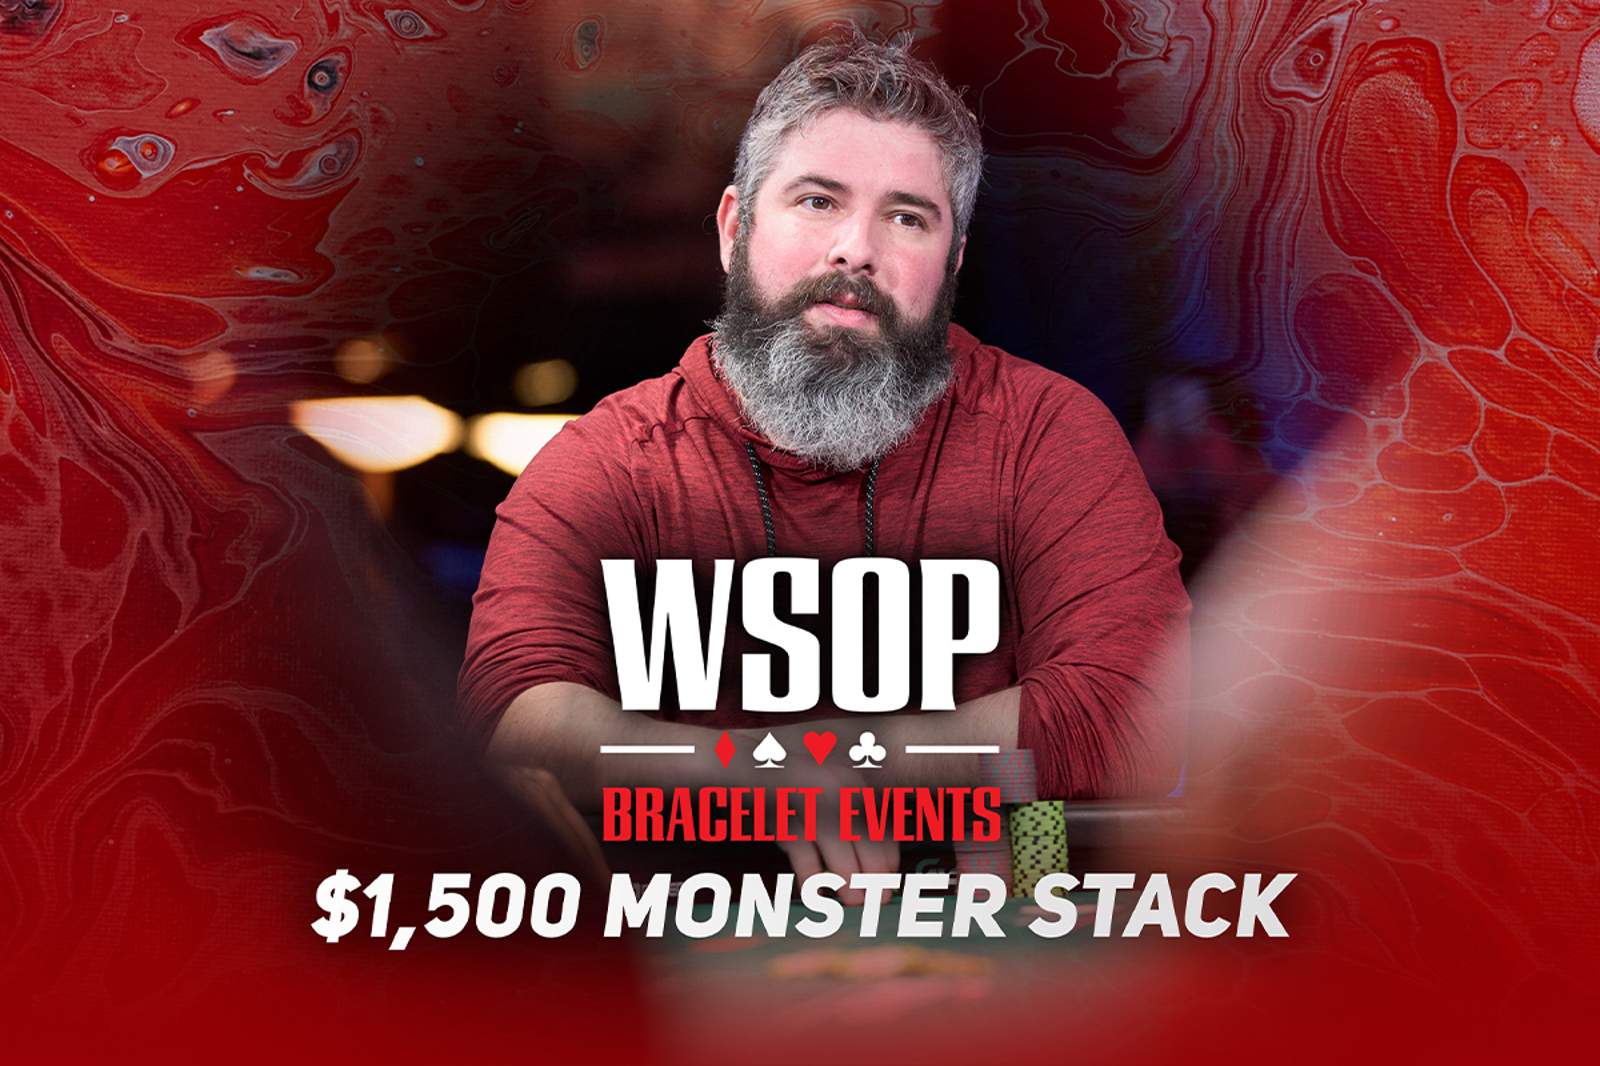 Watch the WSOP Event #30: $1,500 Monster Stack Today on PokerGO.com